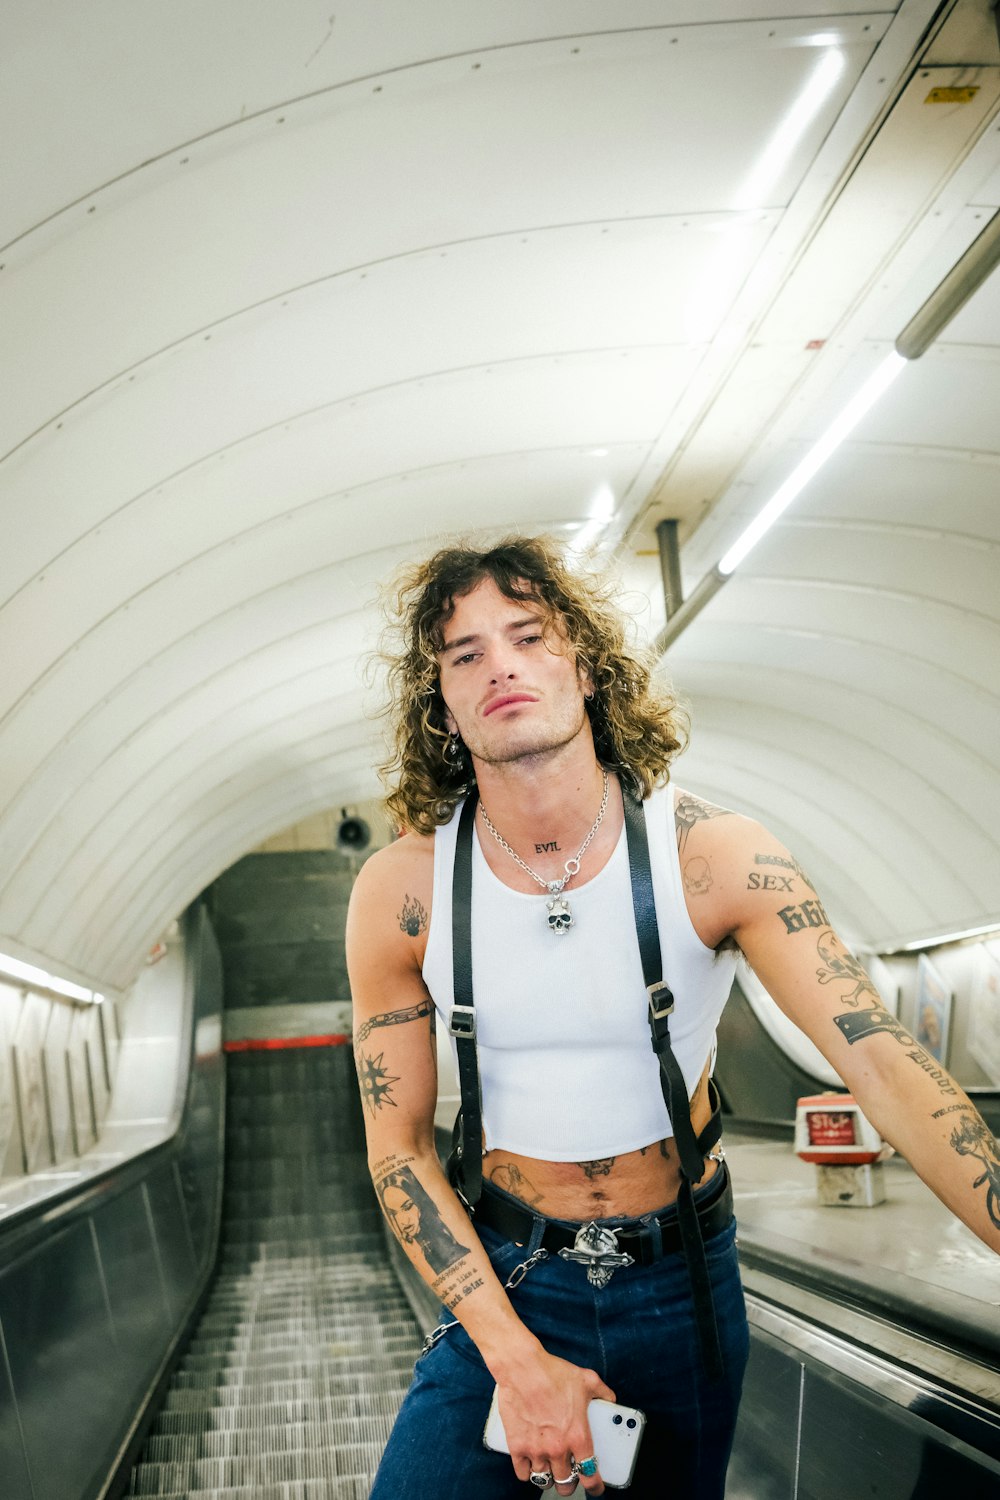 a man with long hair and tattoos standing on an escalator